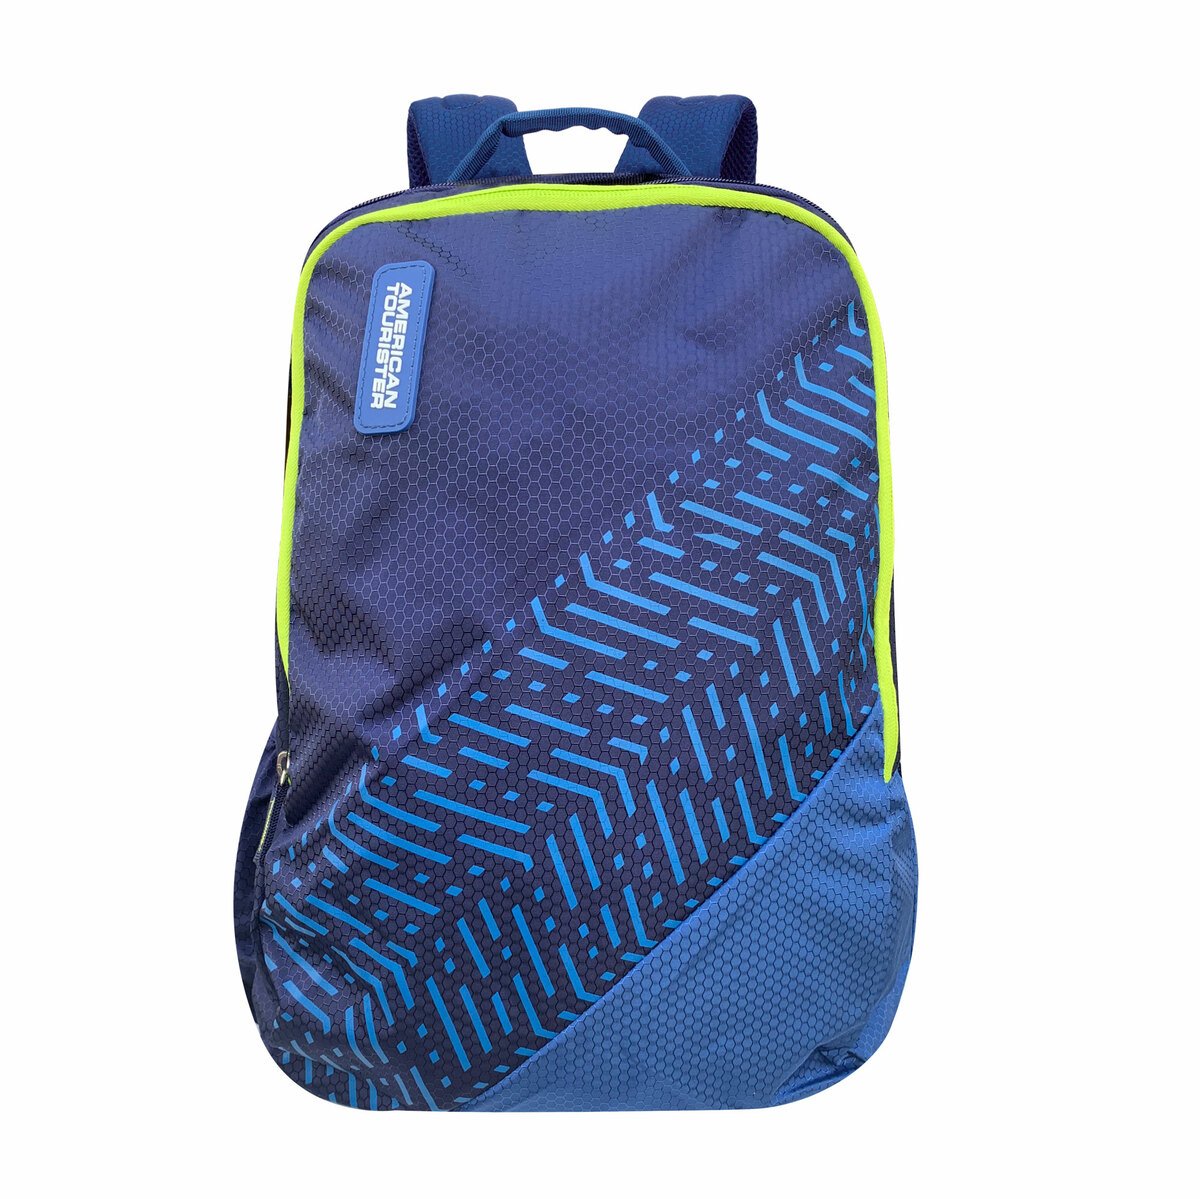 American Tourister Coco Laptop Backpack Blue